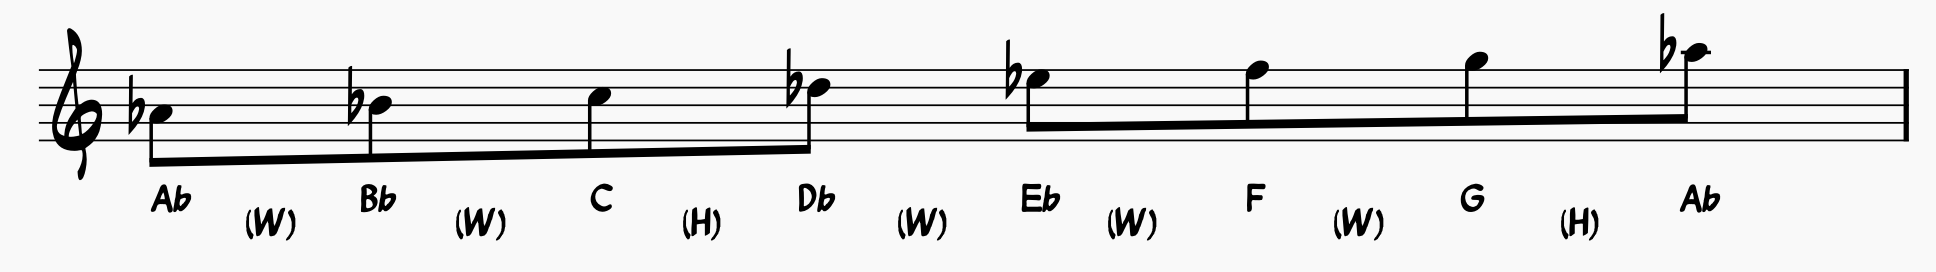 A Flat Major Scale notated with whole steps and half steps